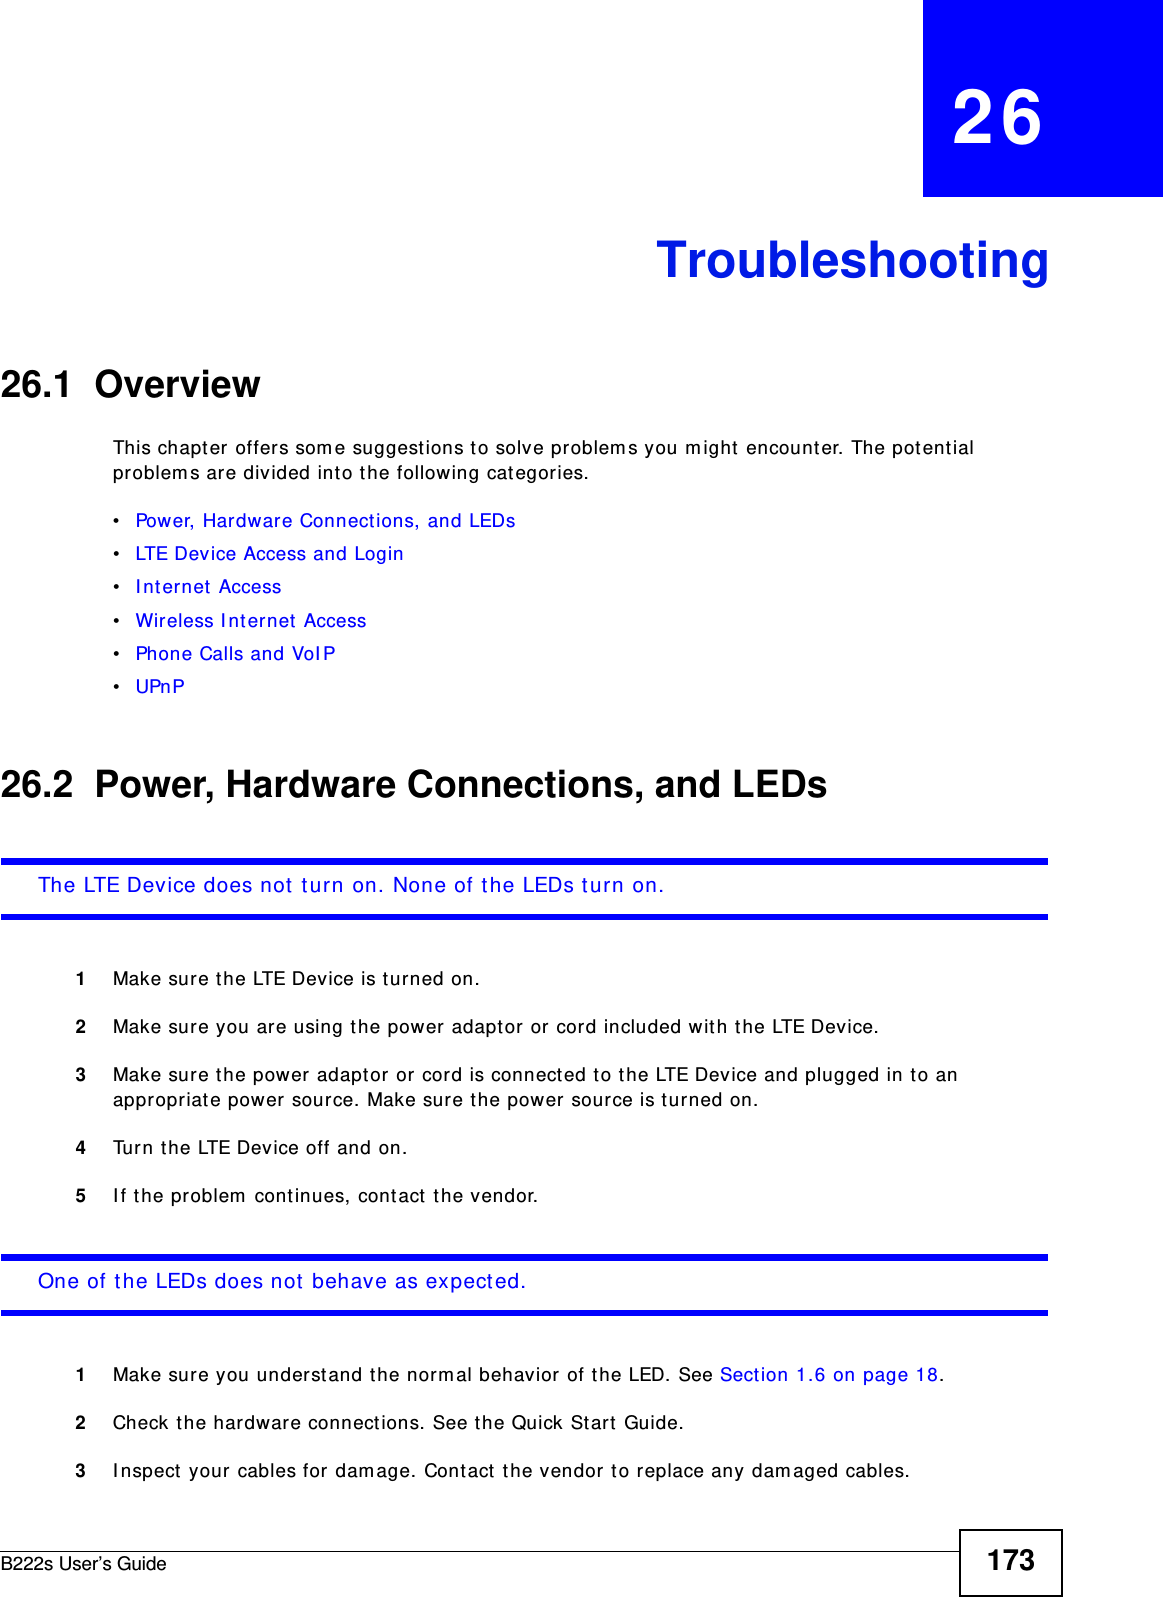 B222s User’s Guide 173CHAPTER   26Troubleshooting26.1  OverviewThis chapt er  offers som e suggest ions t o solve problem s you m ight  encount er. The potential problem s are divided int o t he following categories. •Power, Hardware Connections, and LEDs•LTE Device Access and Login•I nt ernet Access•Wireless I nt ernet Access•Phone Calls and VoI P•UPnP26.2  Power, Hardware Connections, and LEDsThe LTE Device does not  t urn on. None of t he LEDs t urn on.1Make sure the LTE Device is t urned on. 2Make sure you are using the power adapt or or cord included with t he LTE Device.3Make sure the power adapt or or cord is connect ed t o t he LTE Device and plugged in t o an appropriate power source. Make sur e t he power source is t urned on.4Turn t he LTE Device off and on. 5I f t he problem  cont inues, cont act  t he vendor.One of the LEDs does not  behave as expected.1Make sure you understand t he norm al behavior of t he LED. See Sect ion 1.6 on page 18.2Check the hardware connect ions. See the Quick St ar t  Guide. 3I nspect your cables for dam age. Contact the vendor t o replace any dam aged cables.